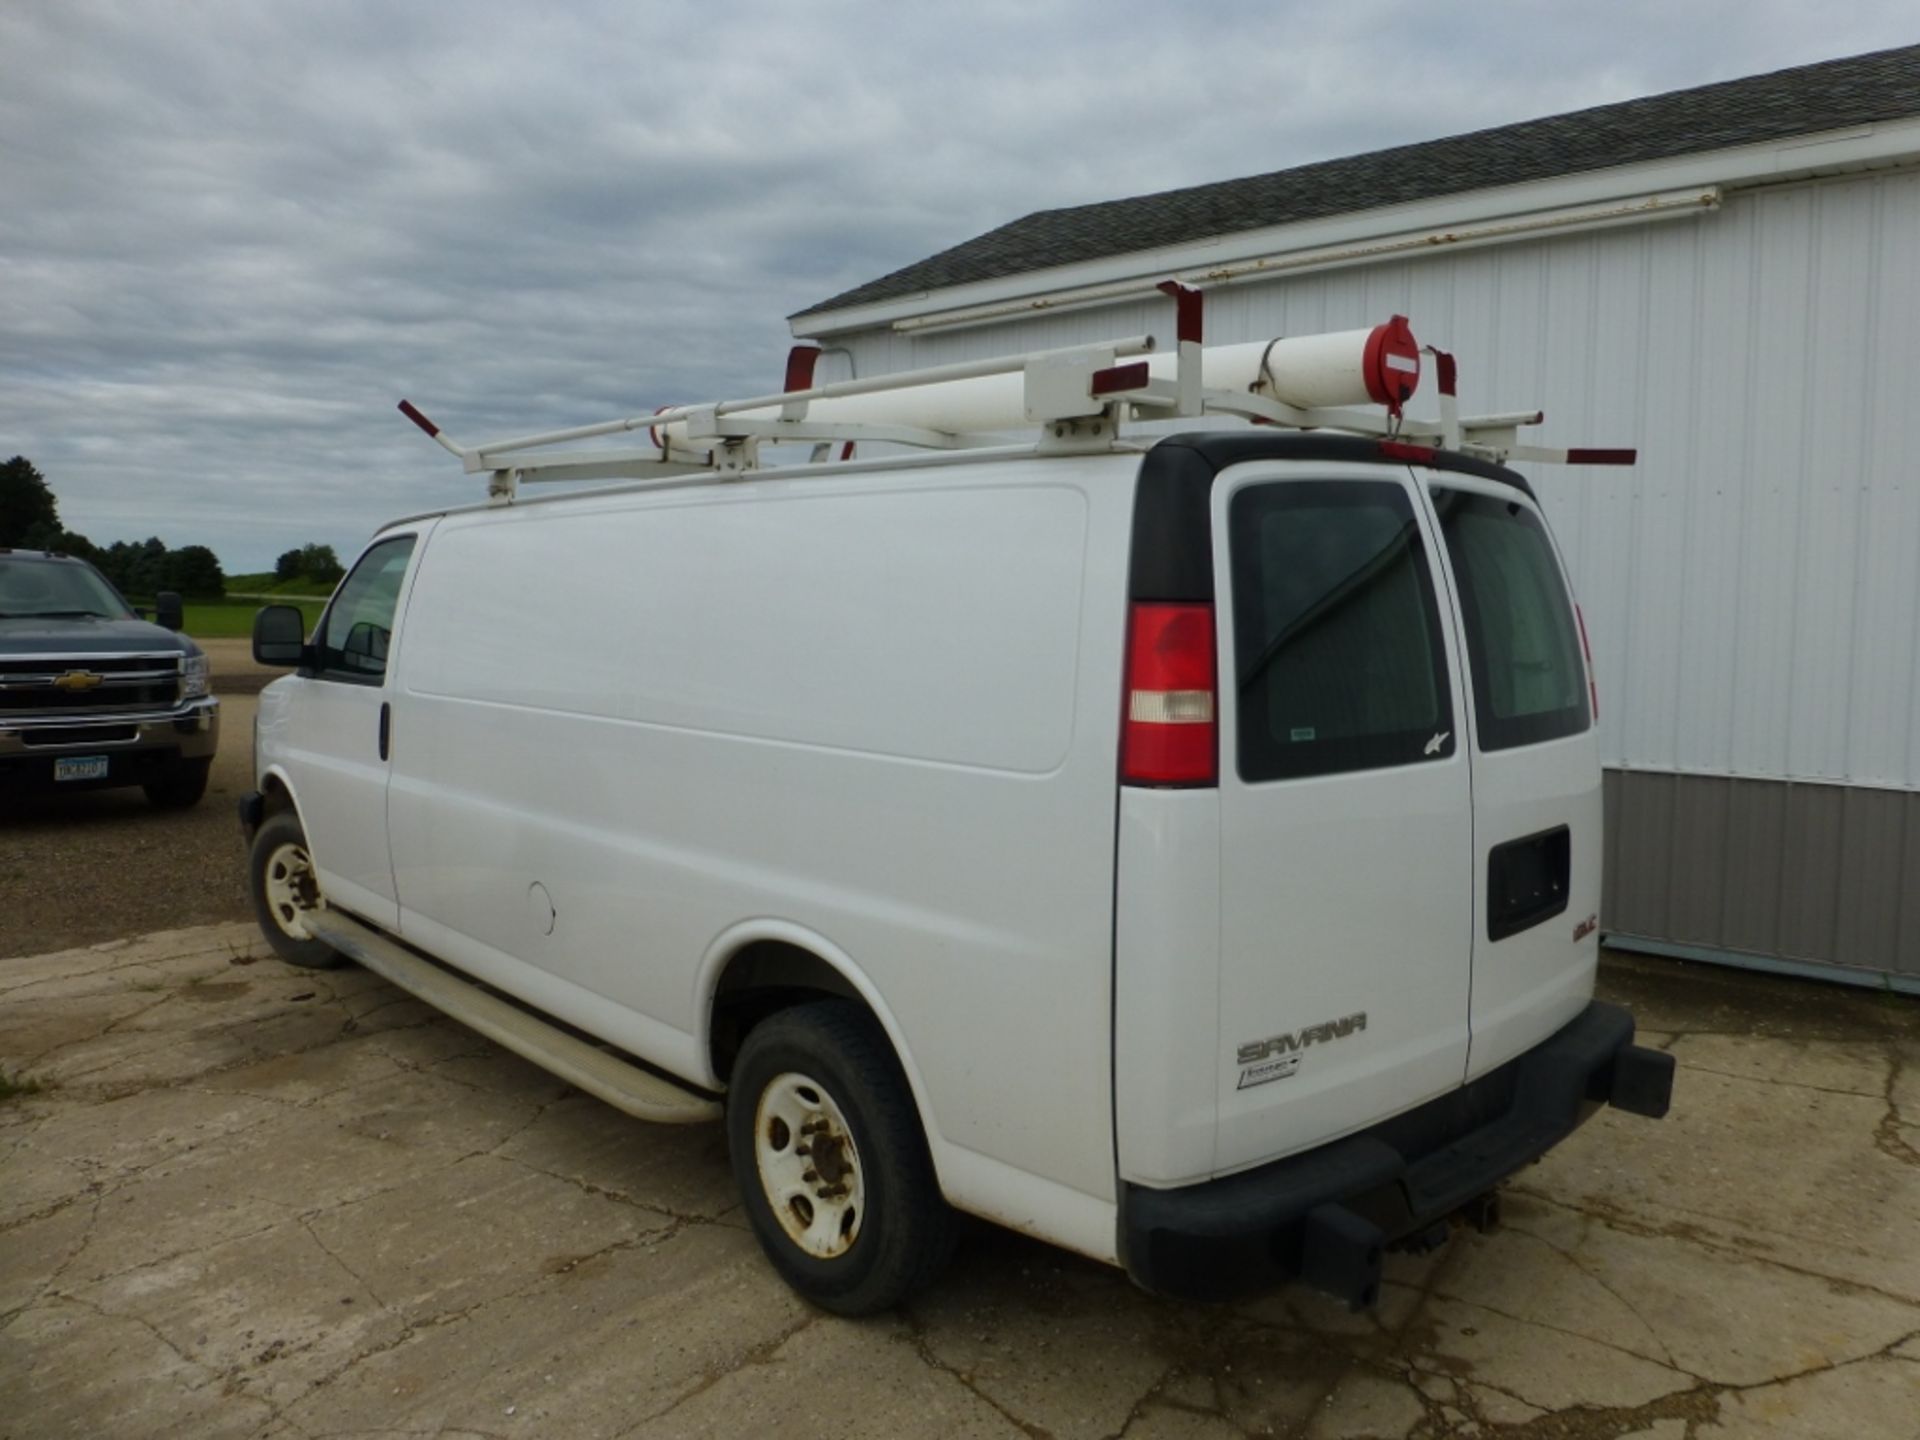 2008 GMC Cargo van, with shelf drawer units, automatic, a.c., manual windows, 254,605 unverified - Image 20 of 22